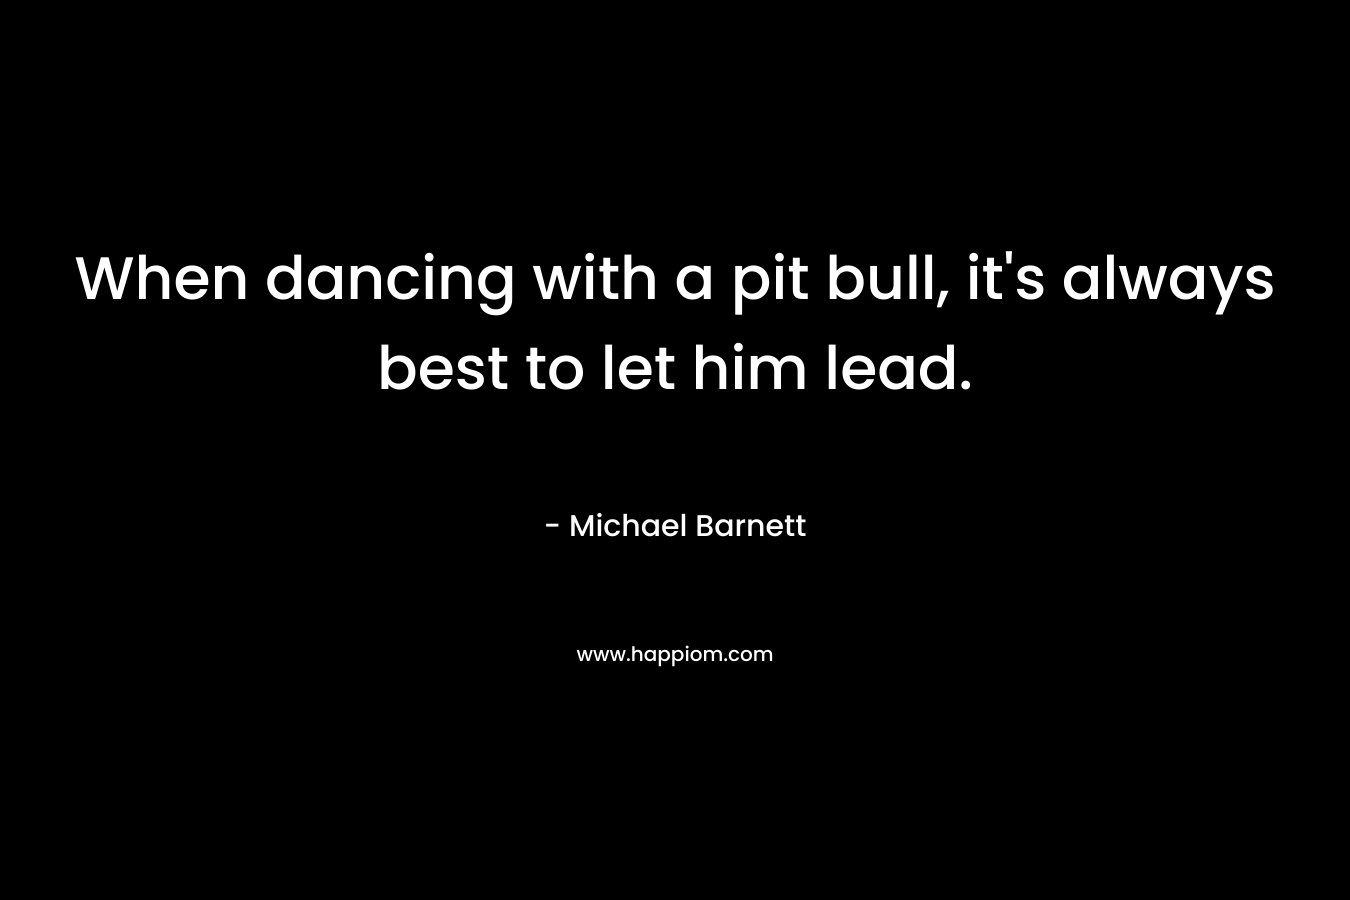 When dancing with a pit bull, it's always best to let him lead.